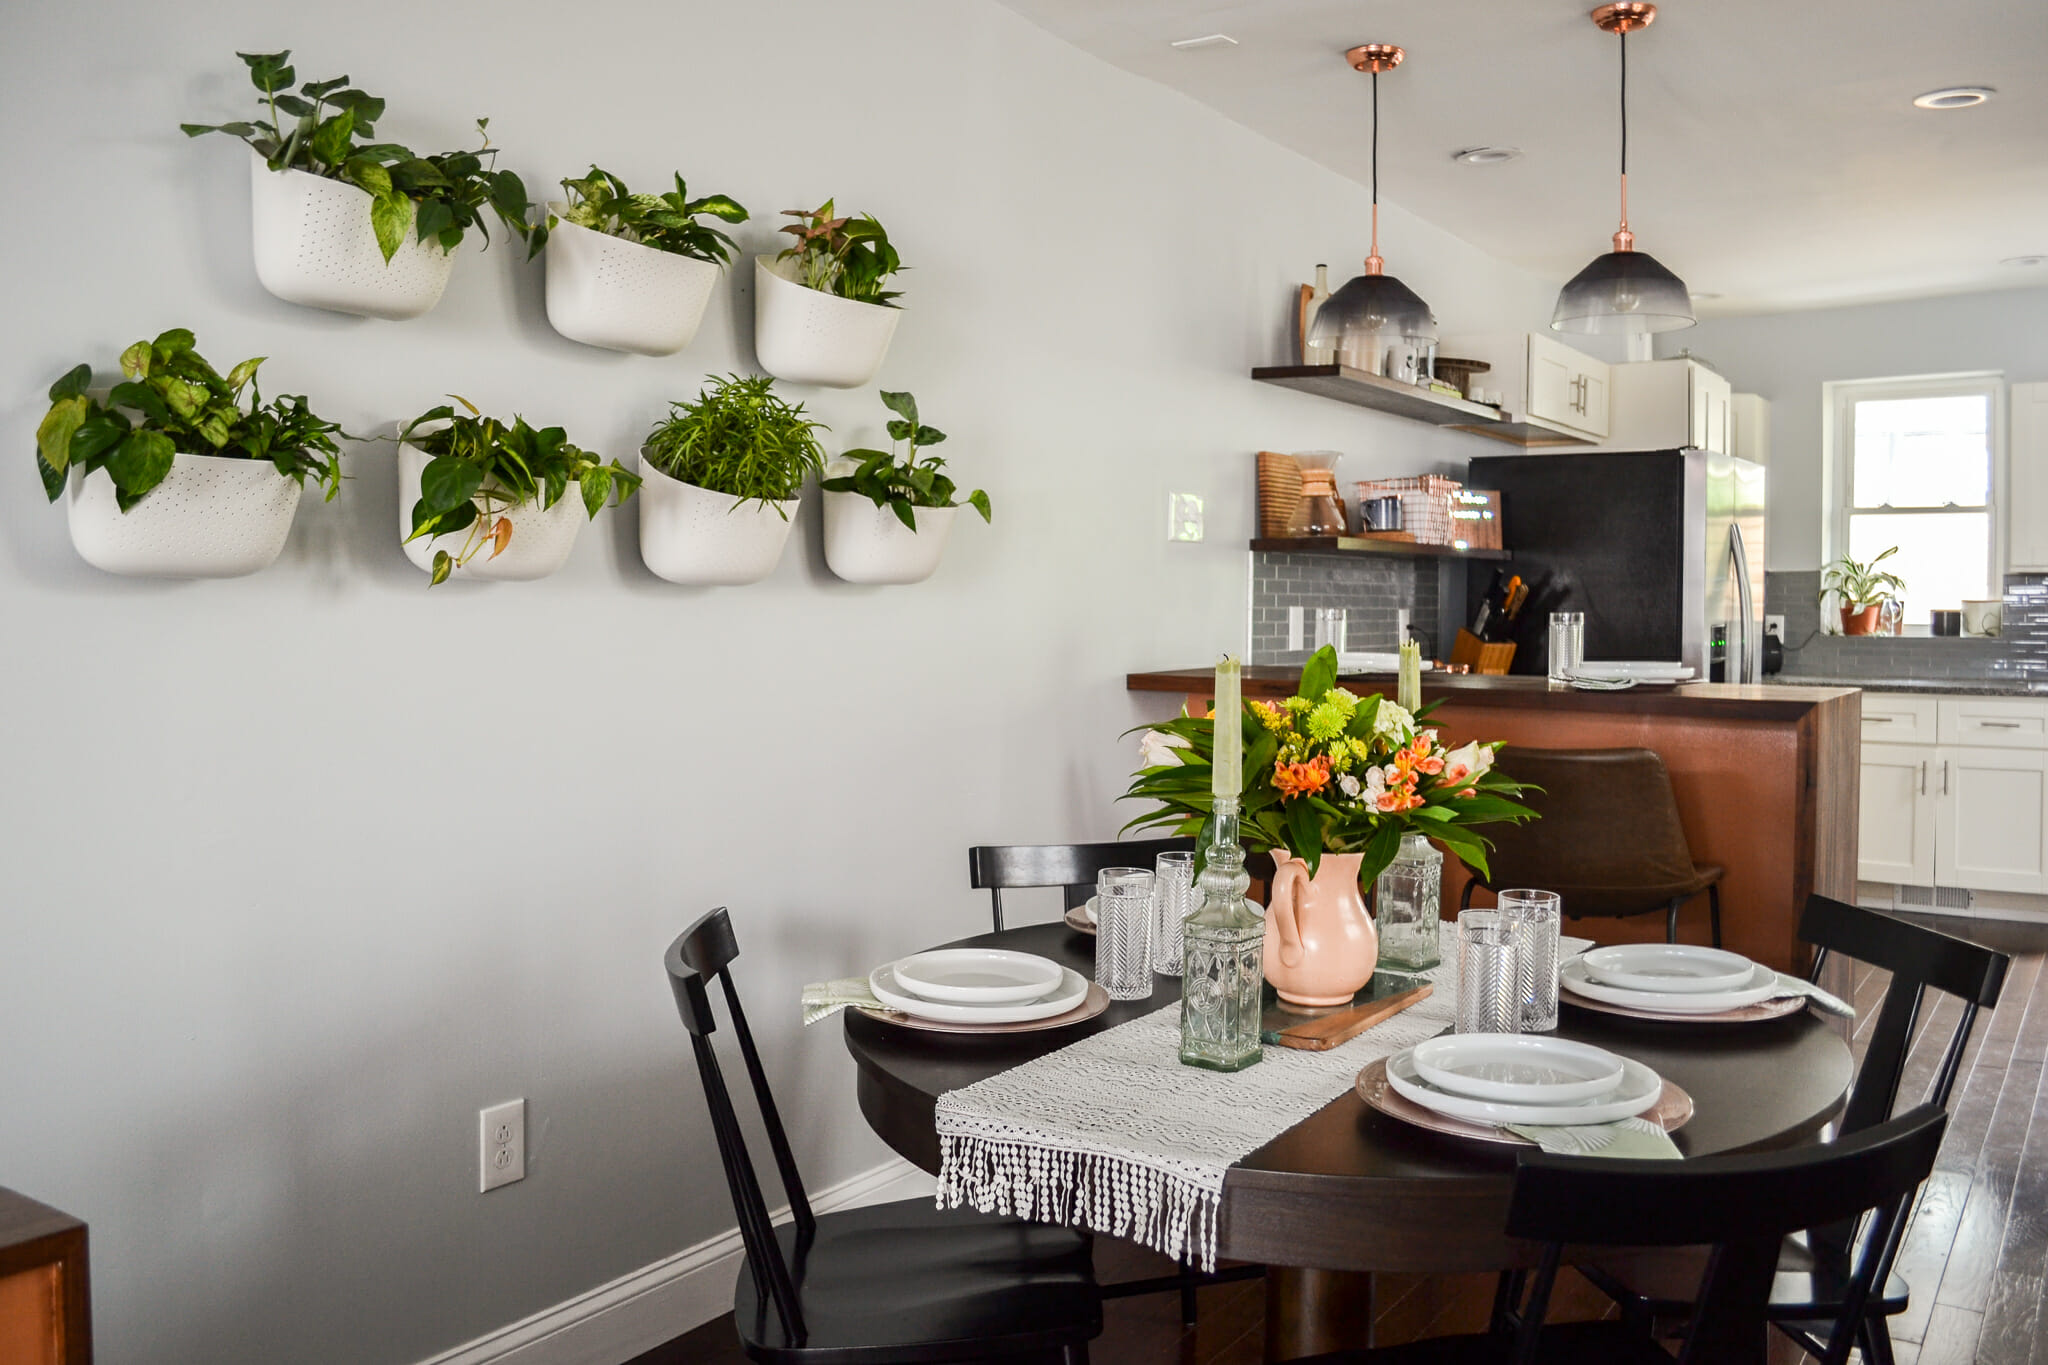 Open kitchen and dining by top philadelphia interior designer Johanna A.